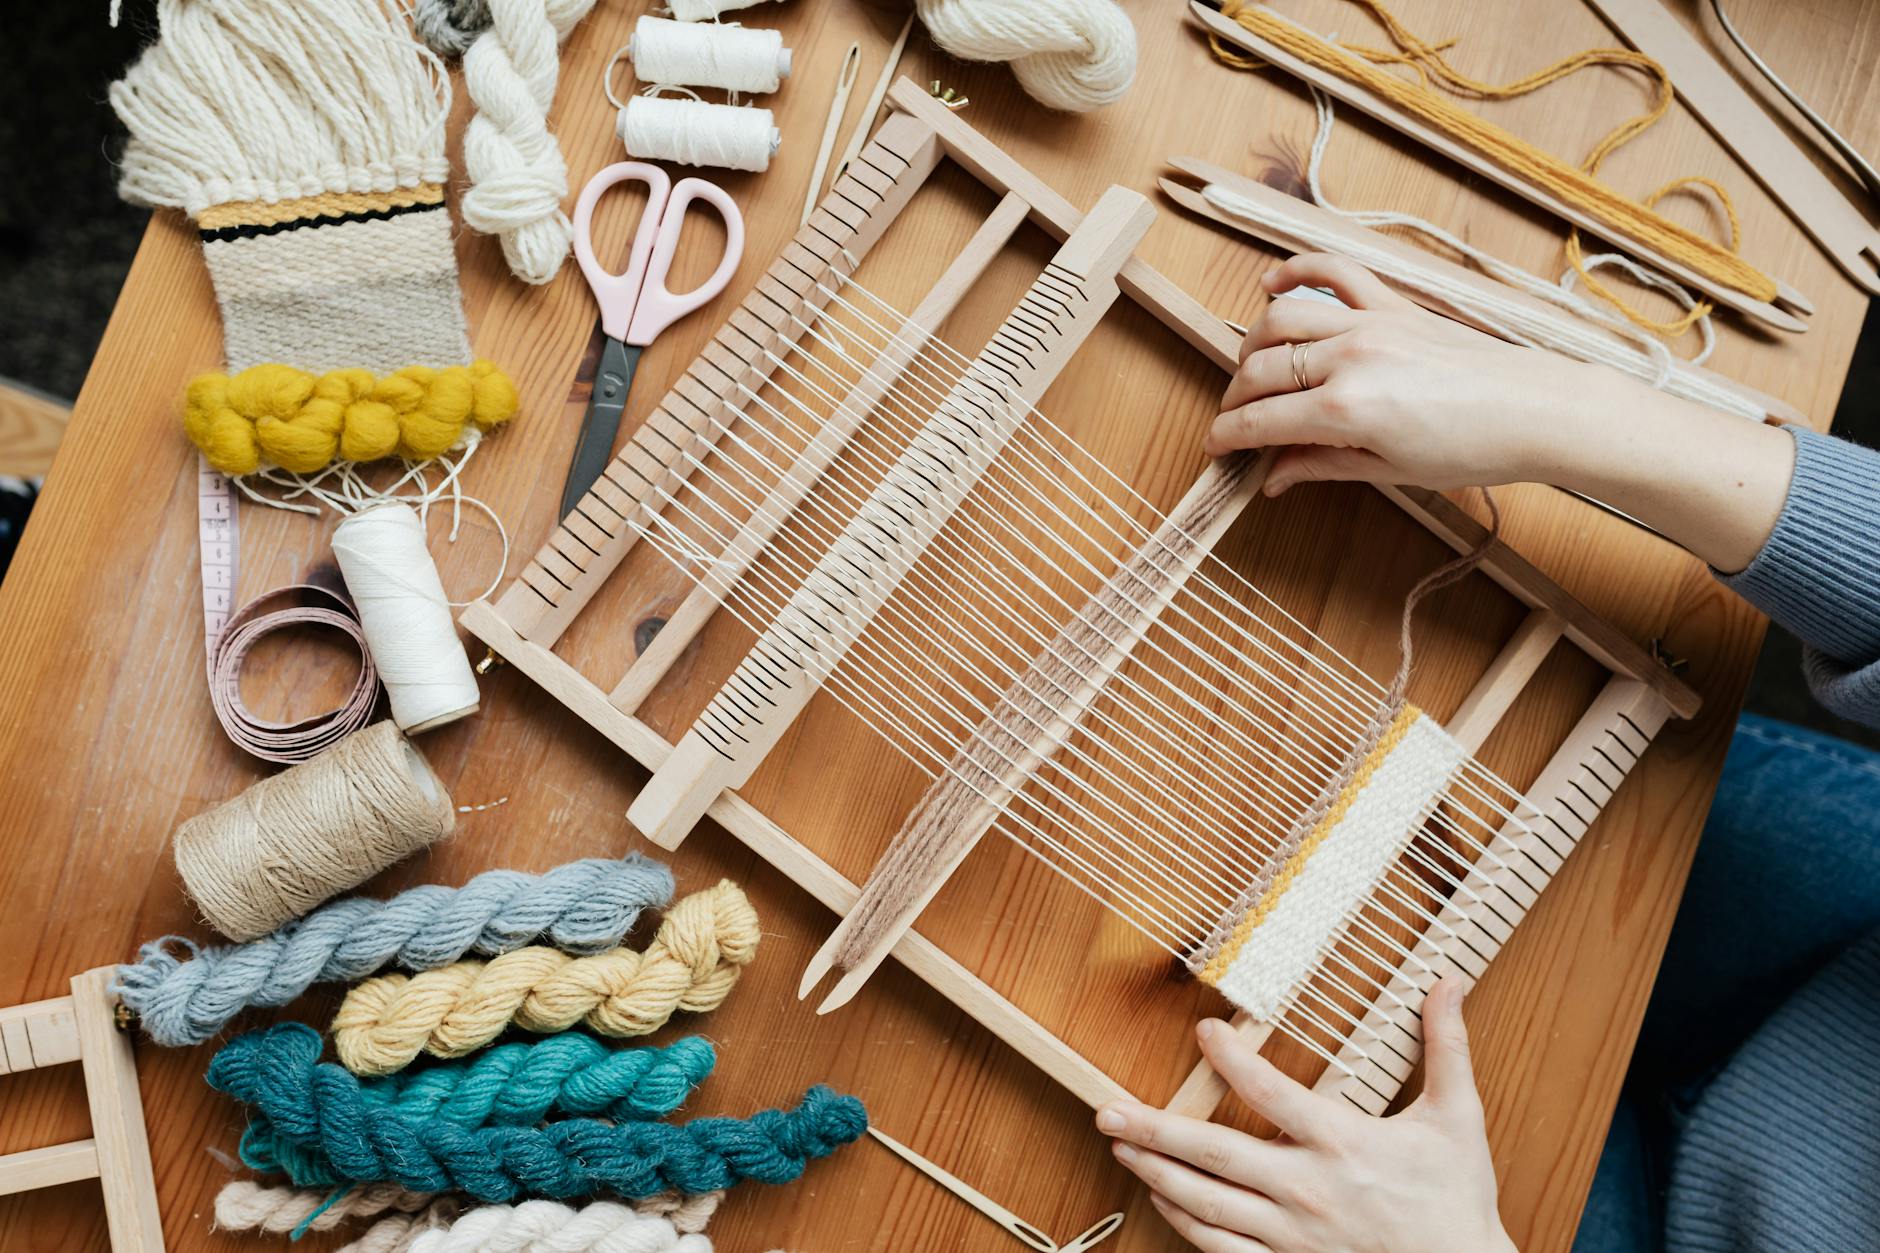 Top view image of a person weaving